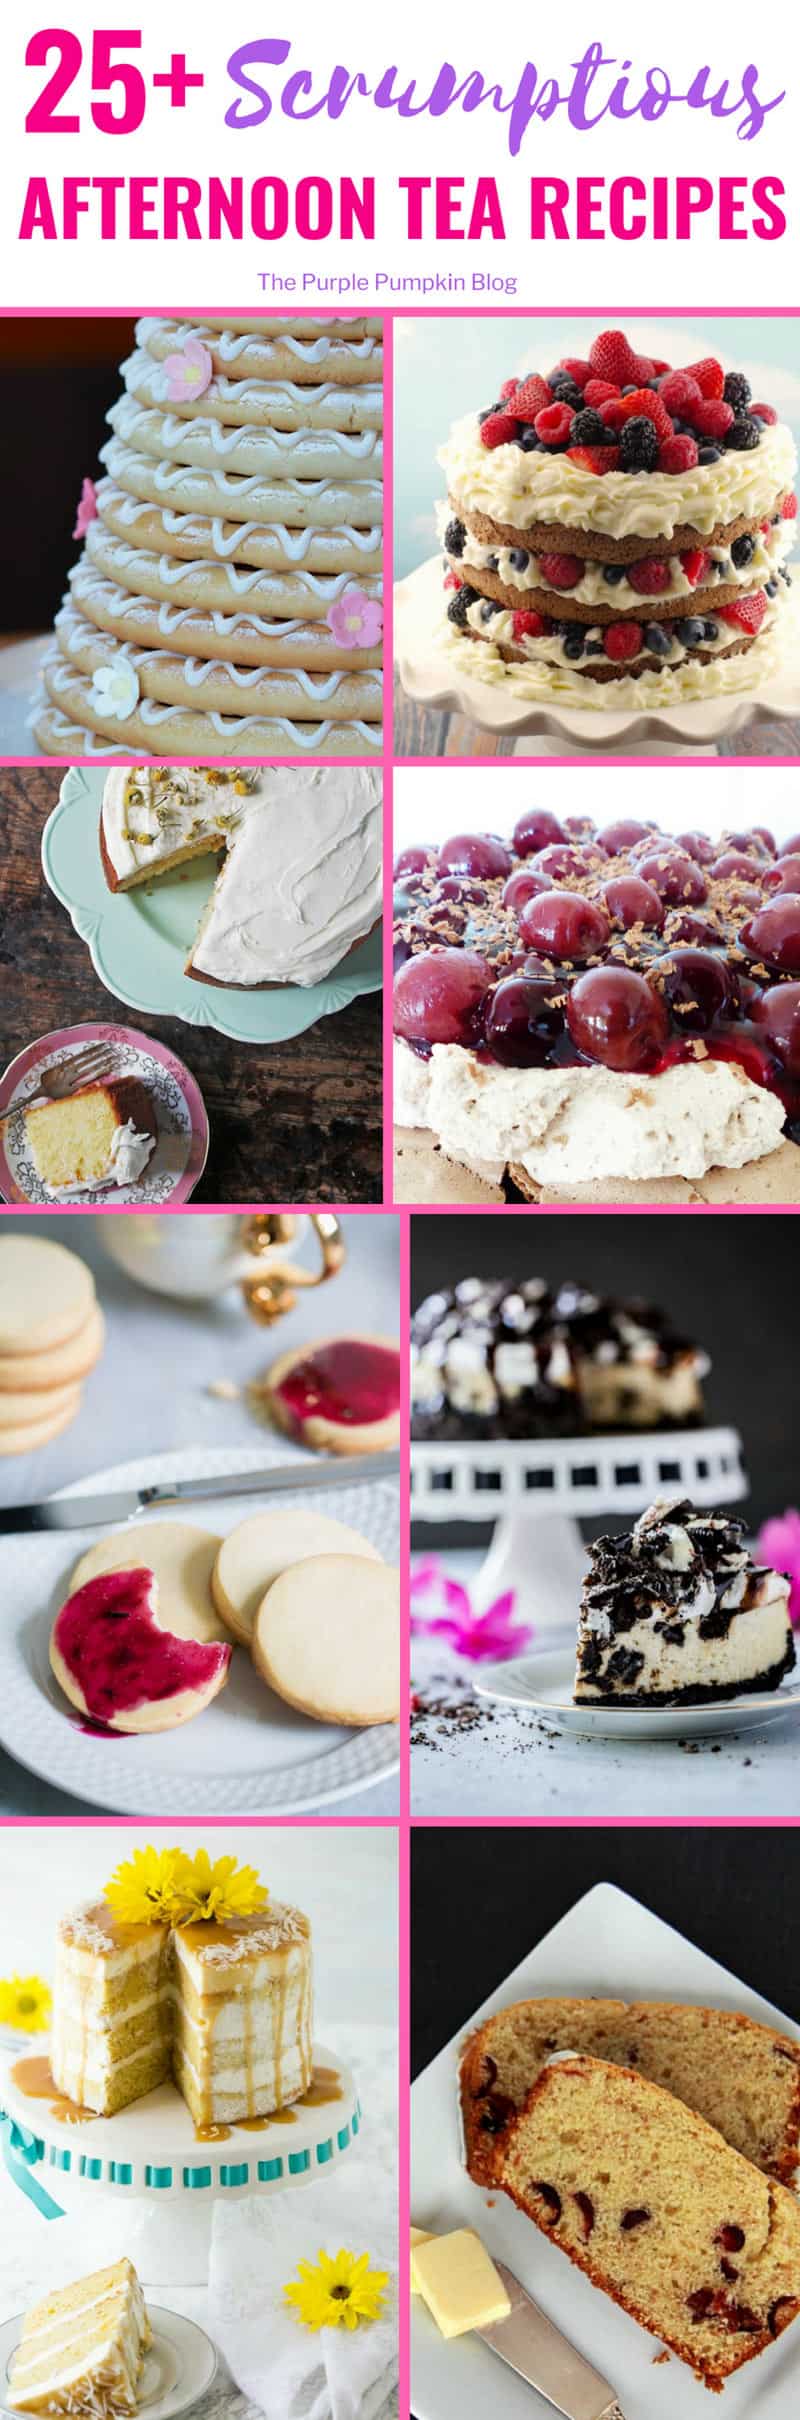 25+ Scrumptious Afternoon Tea Recipes... What is there not to love about #AfternoonTea? Dainty finger sandwiches, scrumptious cakes, crumbly biscuits, and scones with lashings of clotted cream and jam? Not forgetting a hot pot of tea, or a glass of fizz if you're feeling fancy! You'll find so many delicious #AfternoonTeaRecipes on this blog!